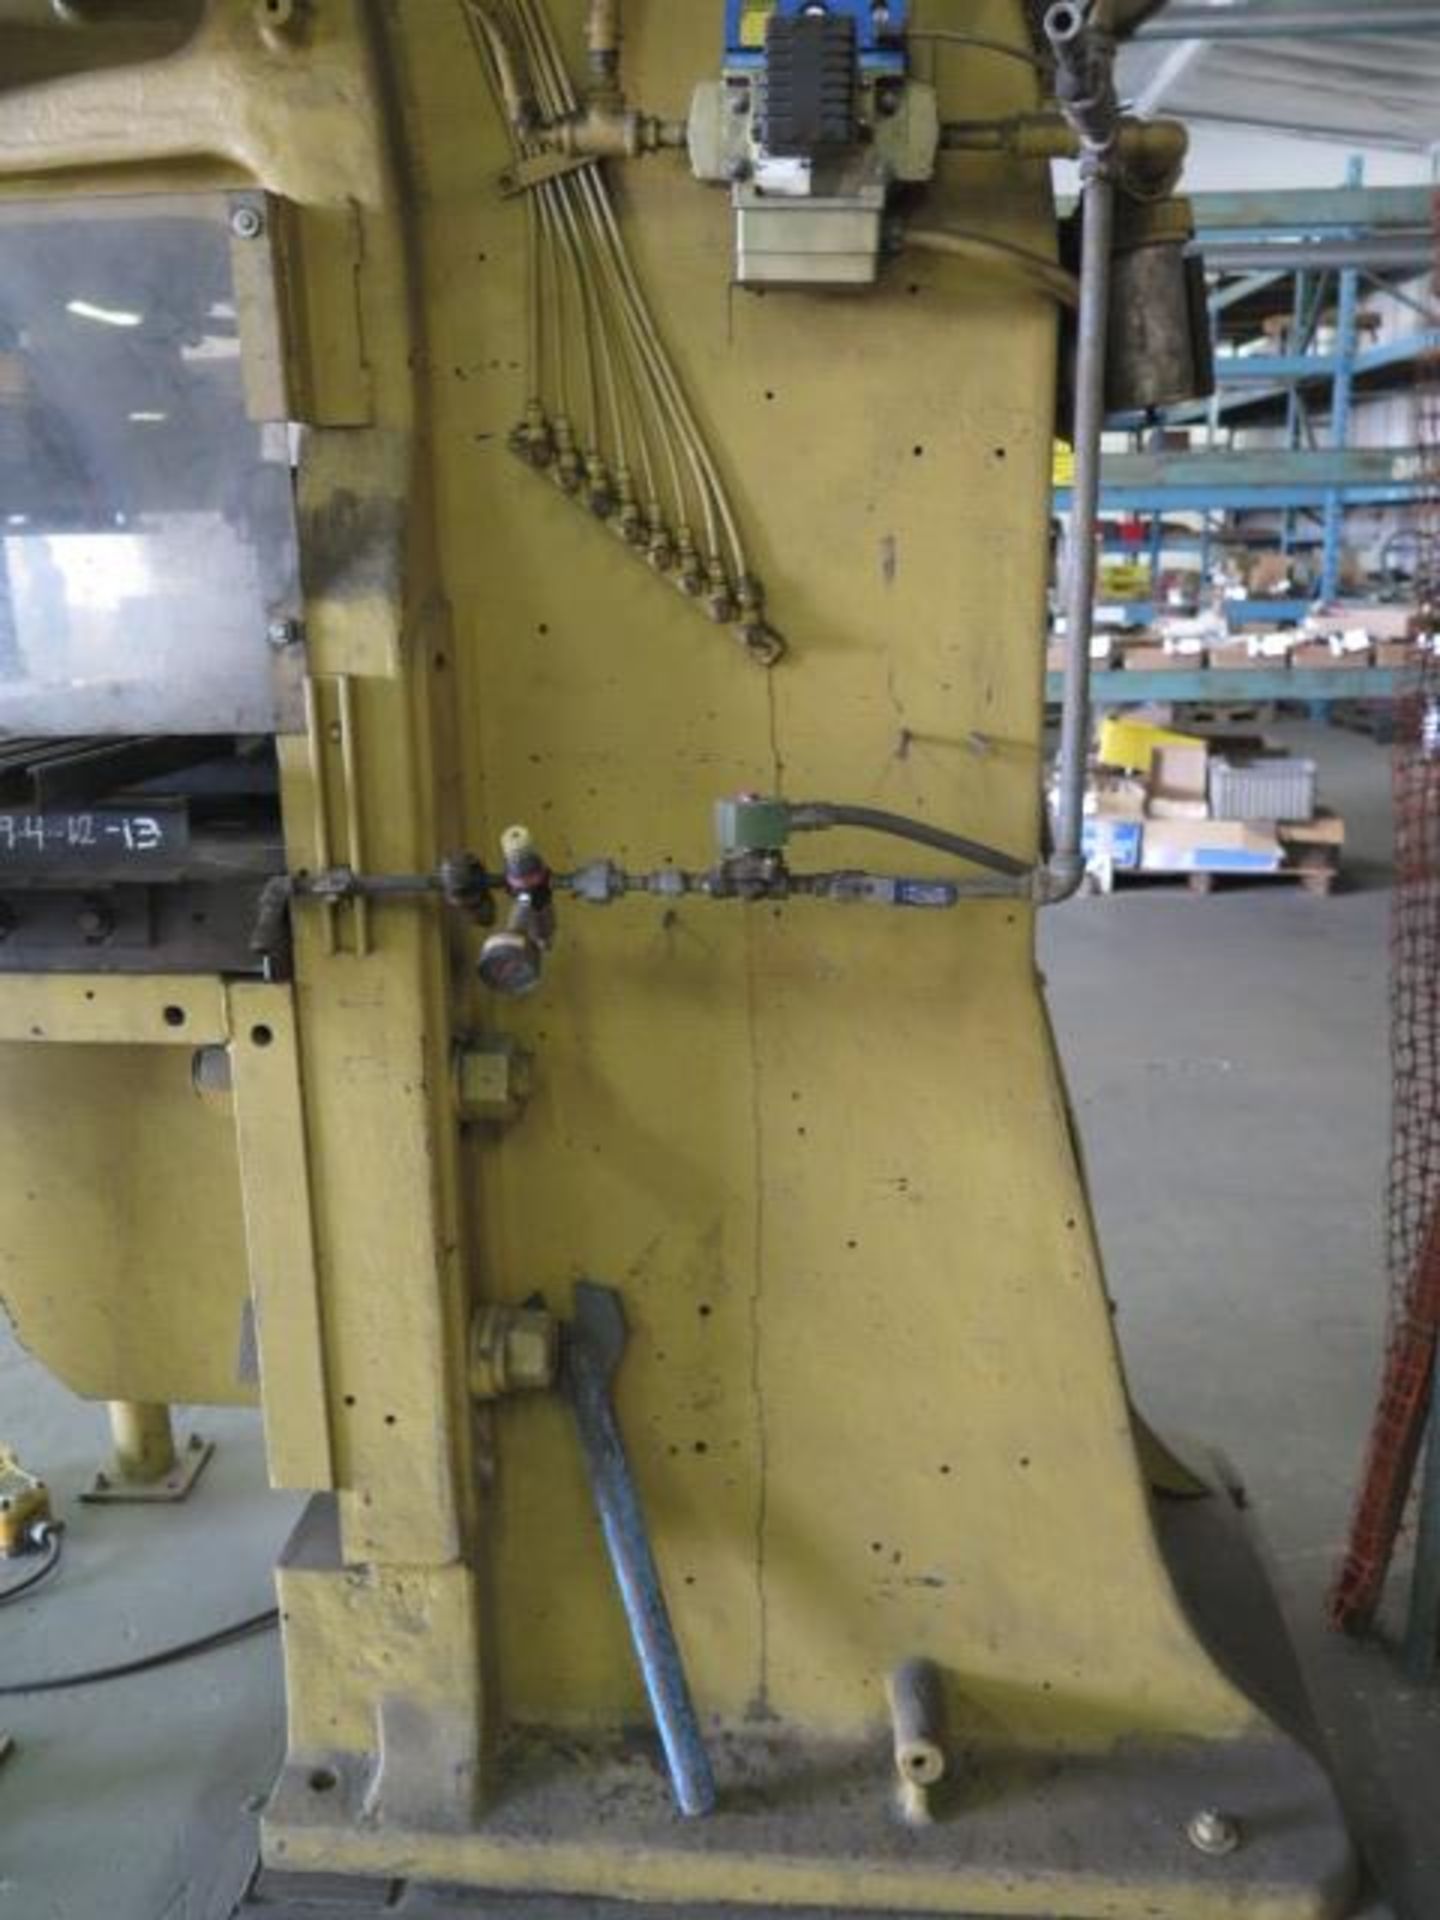 65 Ton Stamping Press w/ Pneumatic Clutch, Brake, 25” x 32” Bolster SOLD AS-IS, PARTS ONLY - Image 10 of 14